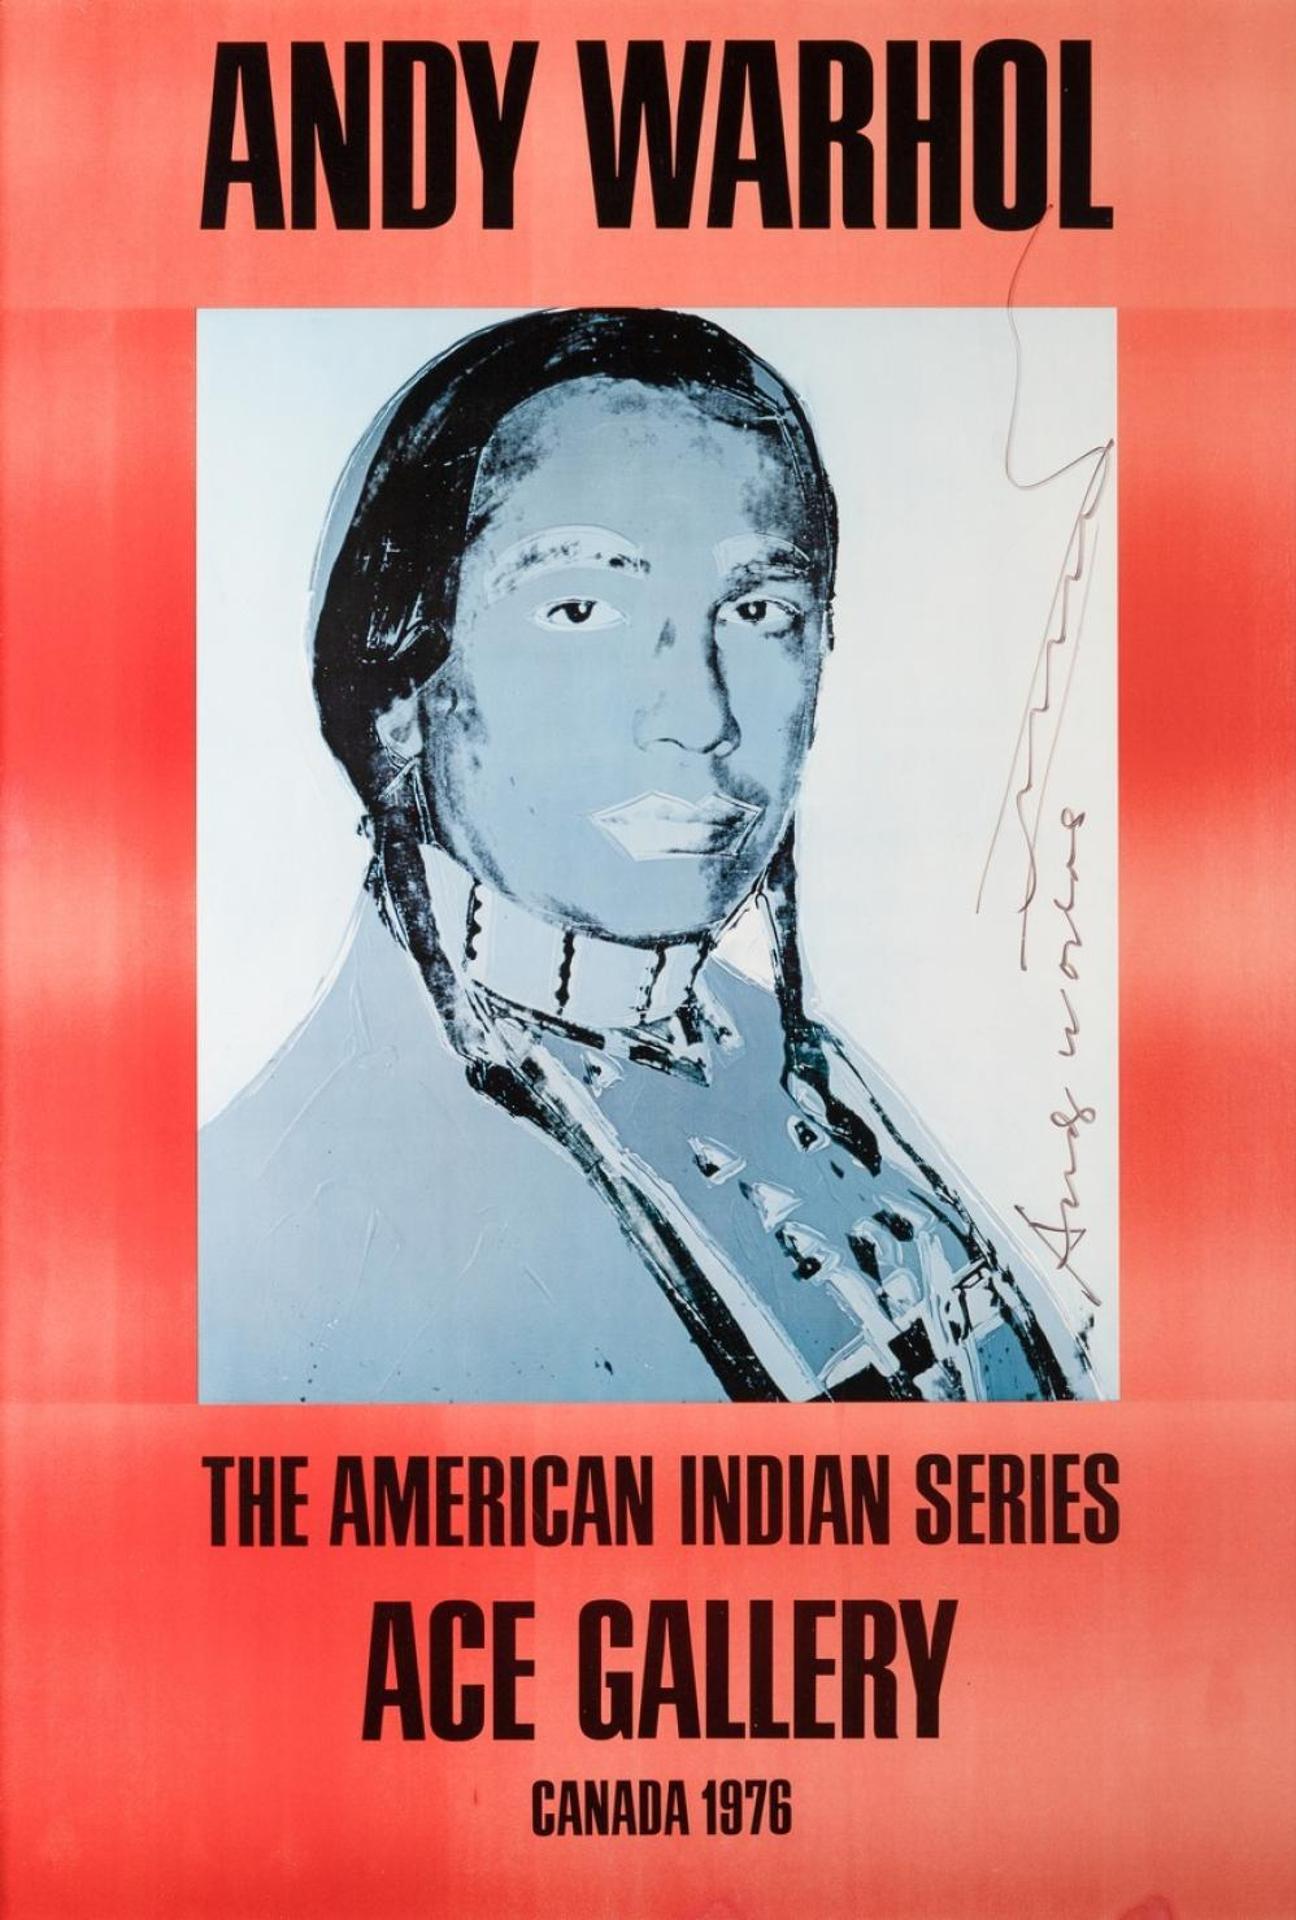 Andy Warhol (1928-1987) - The American Indian Series - Ace Gallery